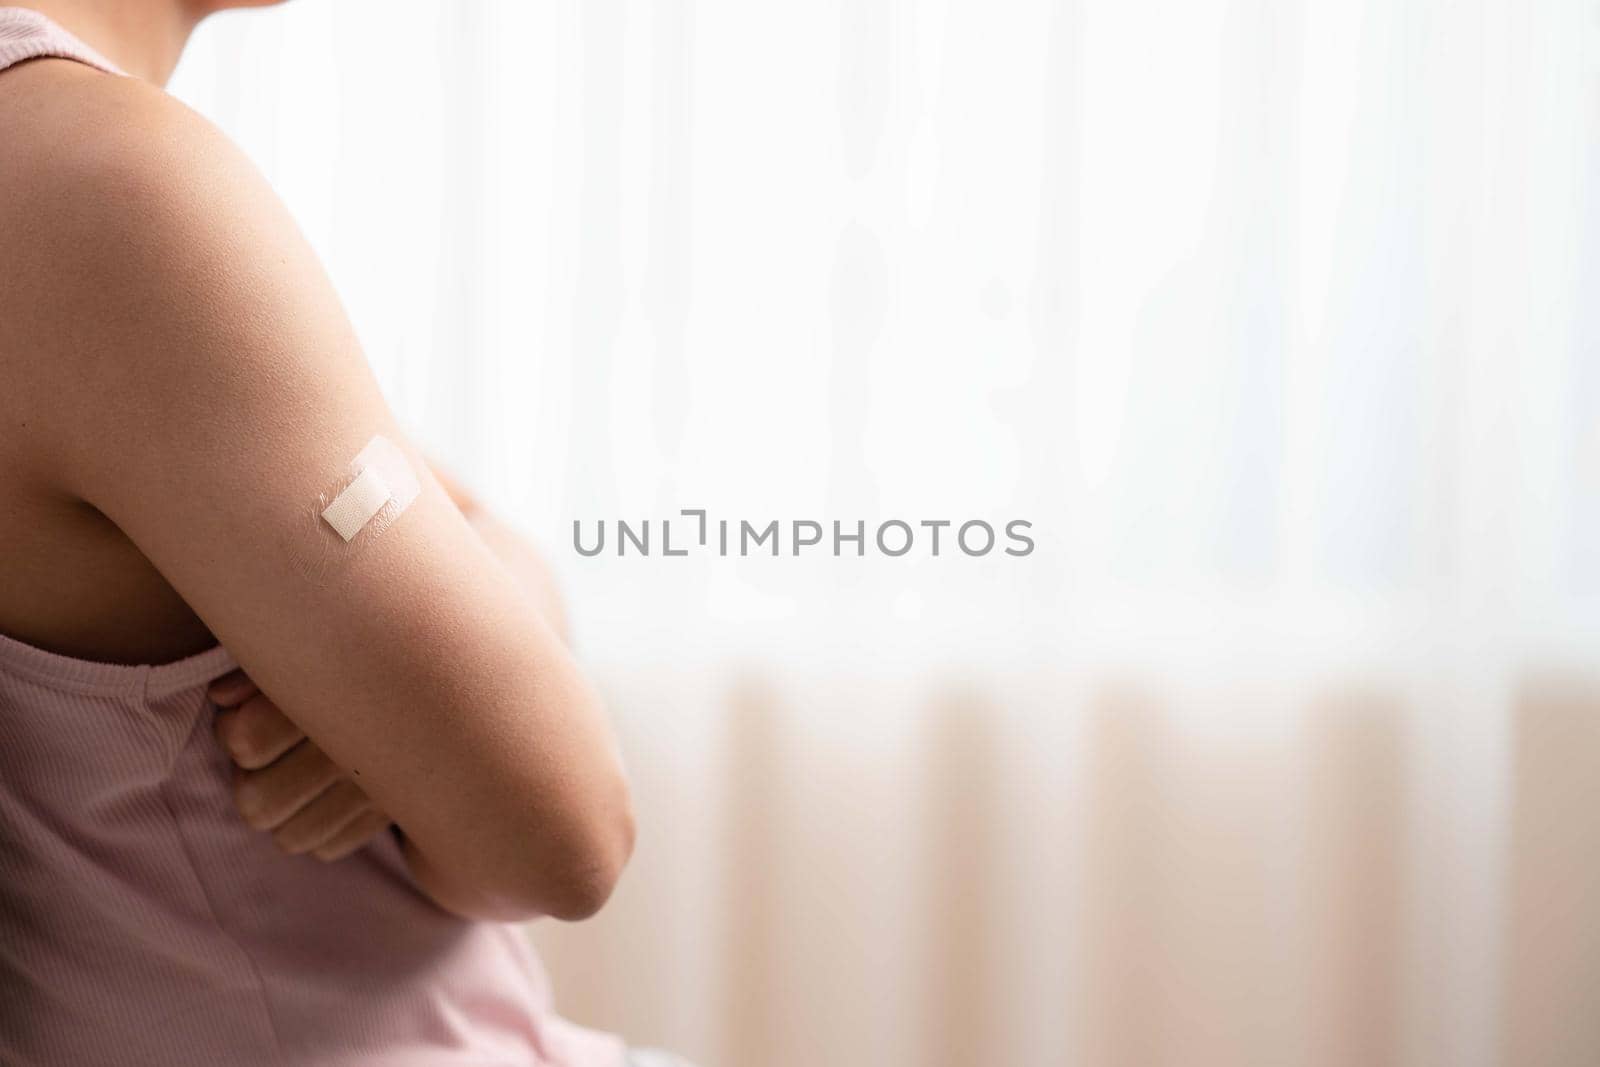 Man with bandage showing his arm after receiving vaccine. by sirawit99